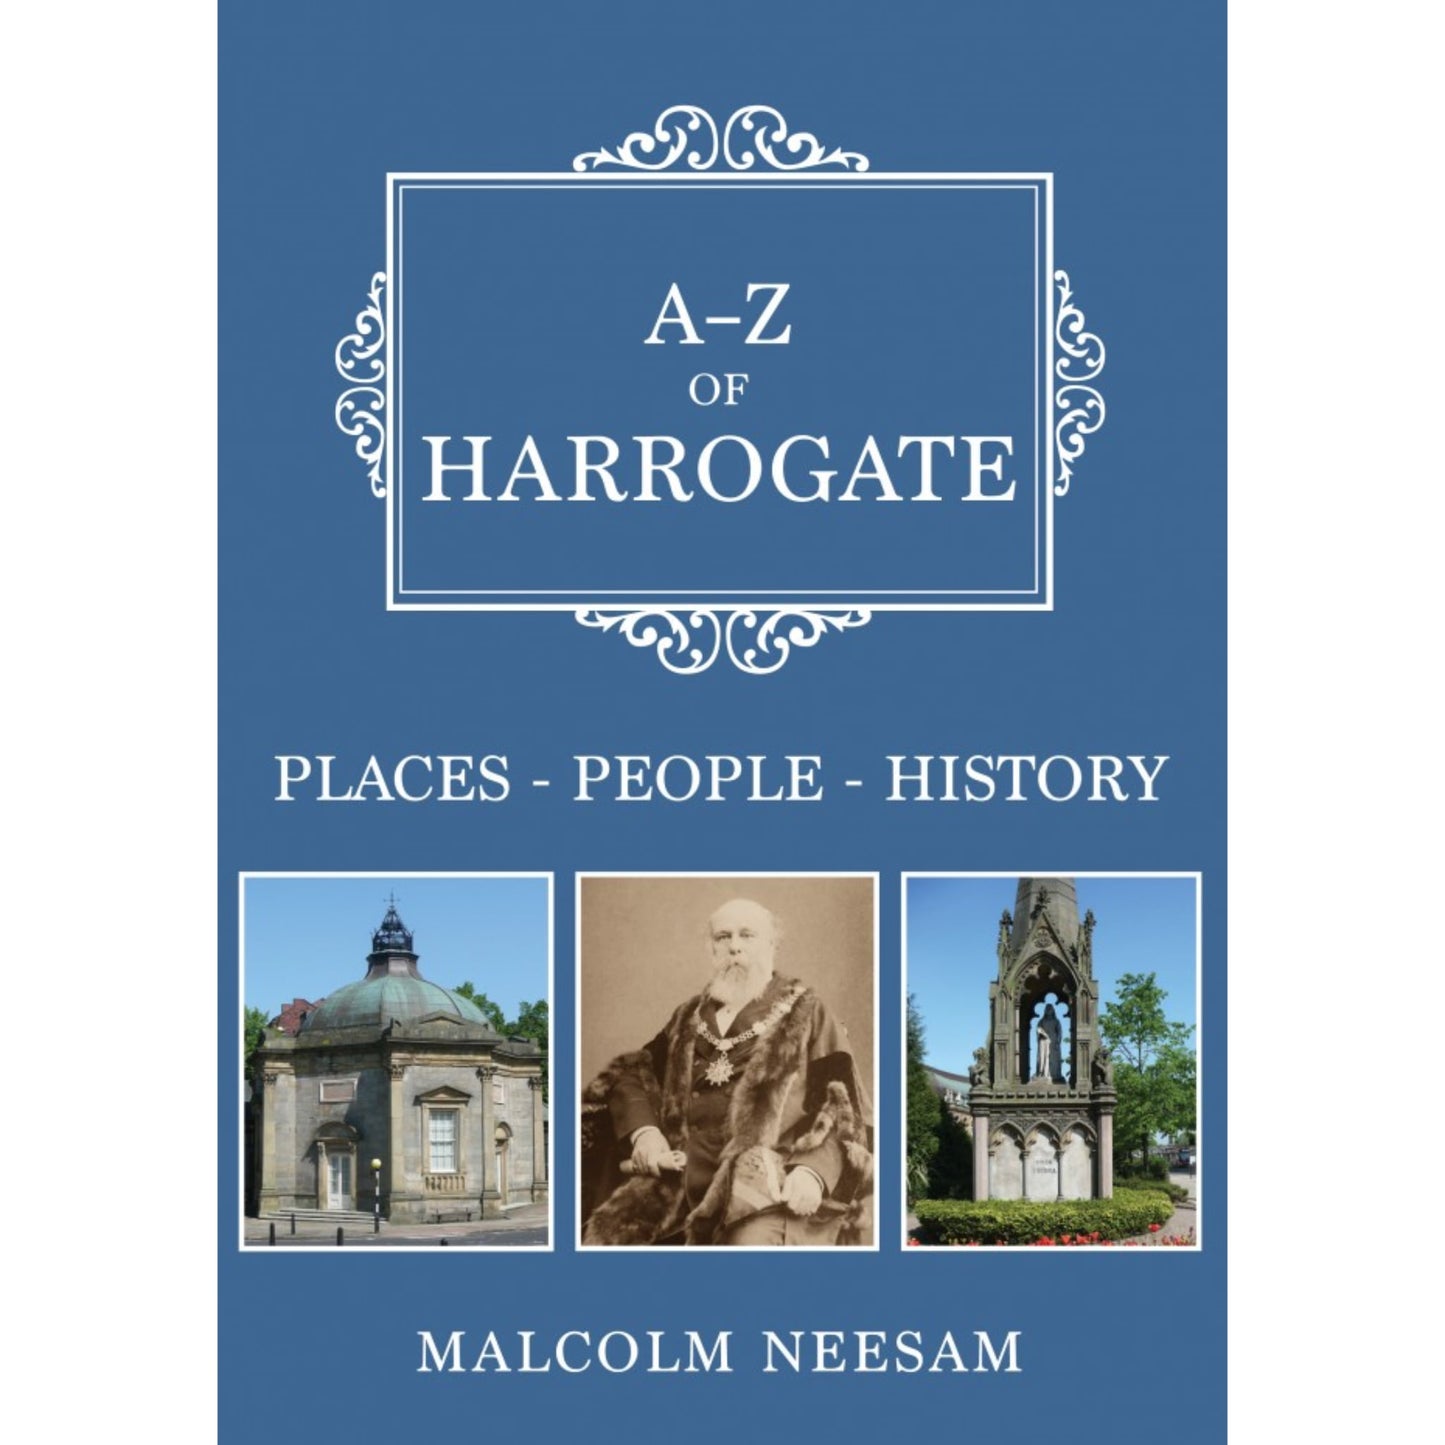 A-Z of Harrogate Book - The Great Yorkshire Shop